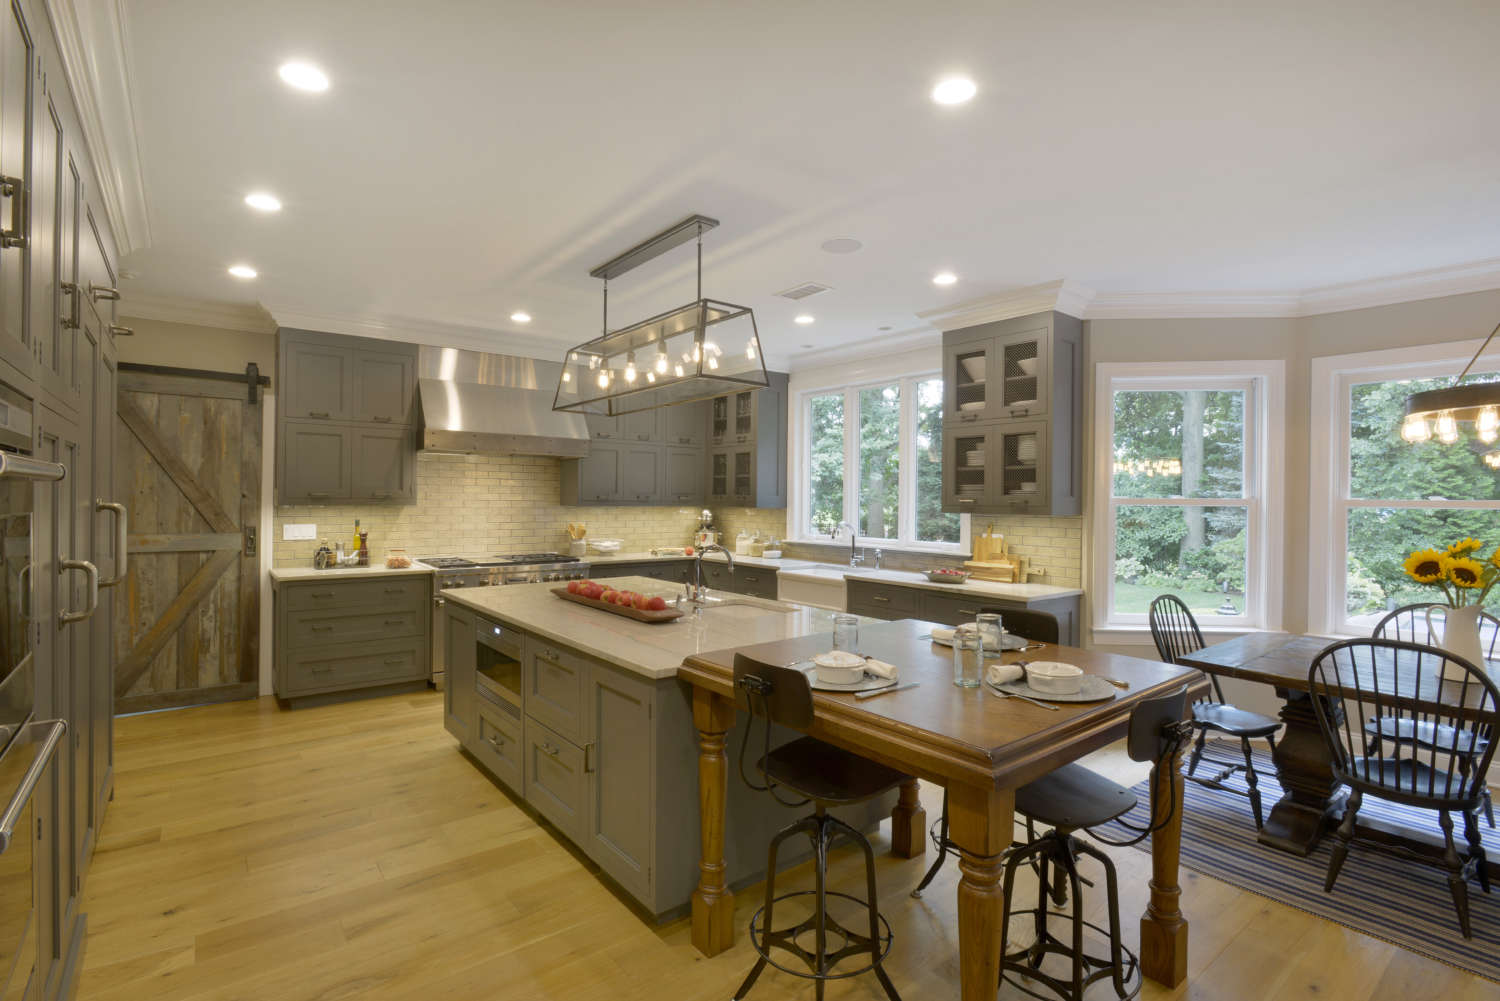 Classic country kitchen features grey Bilotta cabinetry, glazed brick subway tile and reclaimed wood flooring.